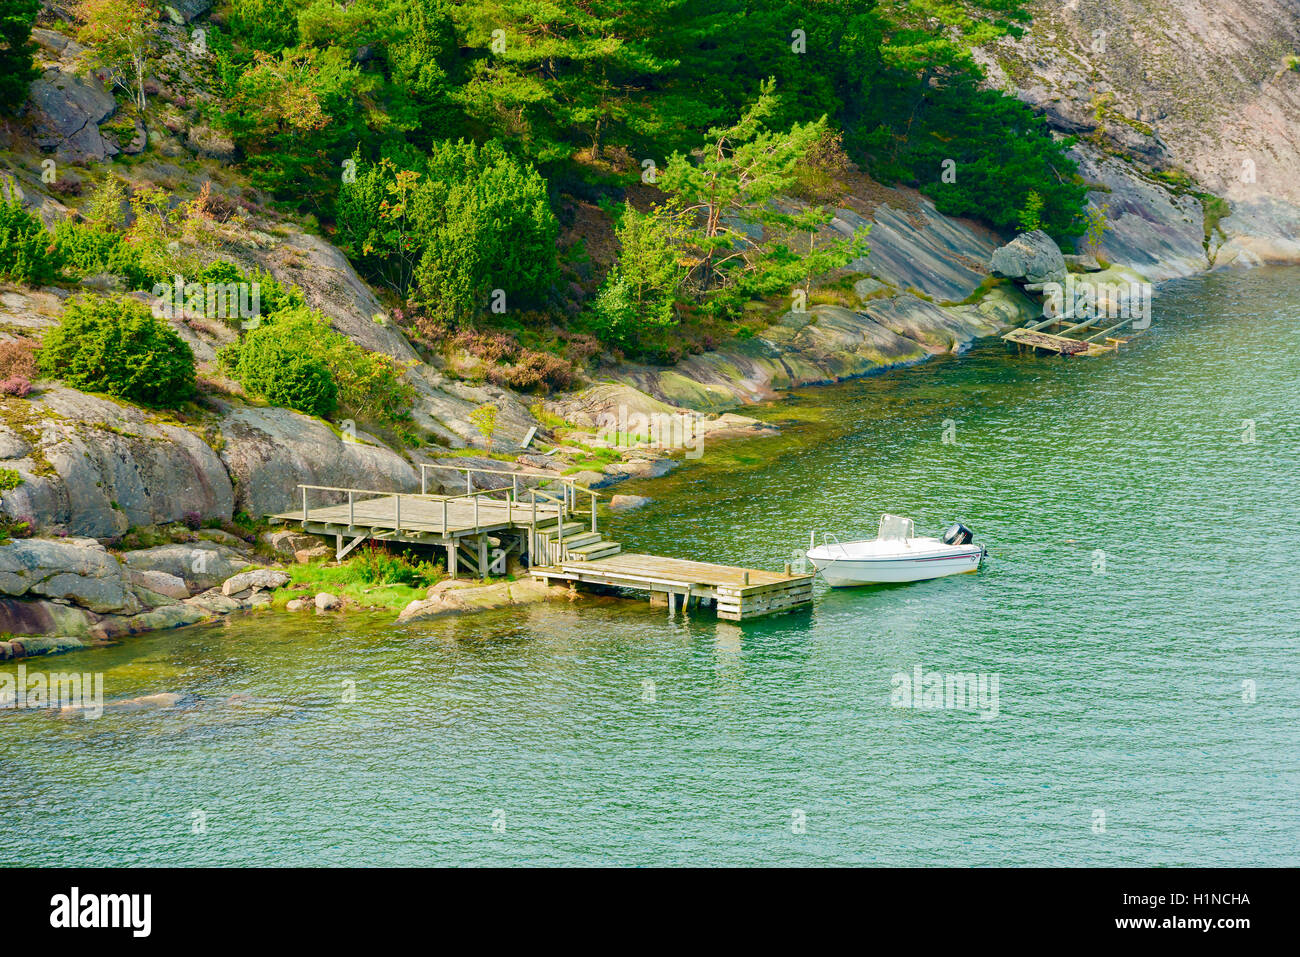 Mjorn, Sweden - September 9, 2016: Travel documentary of small motorboat moored beside a wooden pier in coastal cliff landscape. Stock Photo